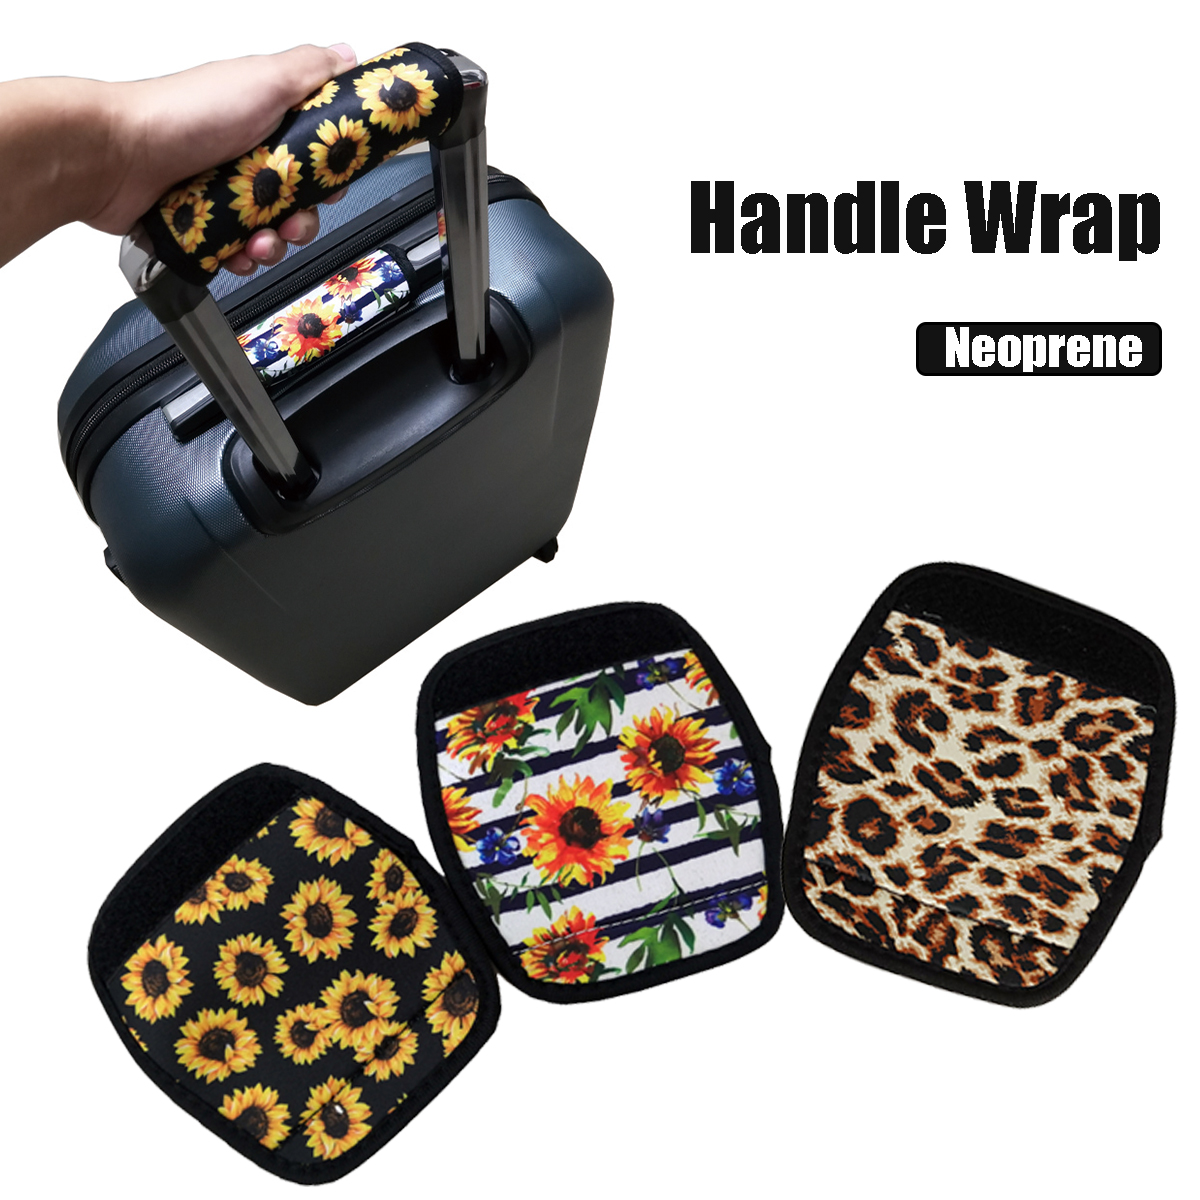 Neoprene-Luggage-Handle-Cover-Protective-Wrap-Sleeve-Soft-Suitcase-Travel-Cover-1653984-1